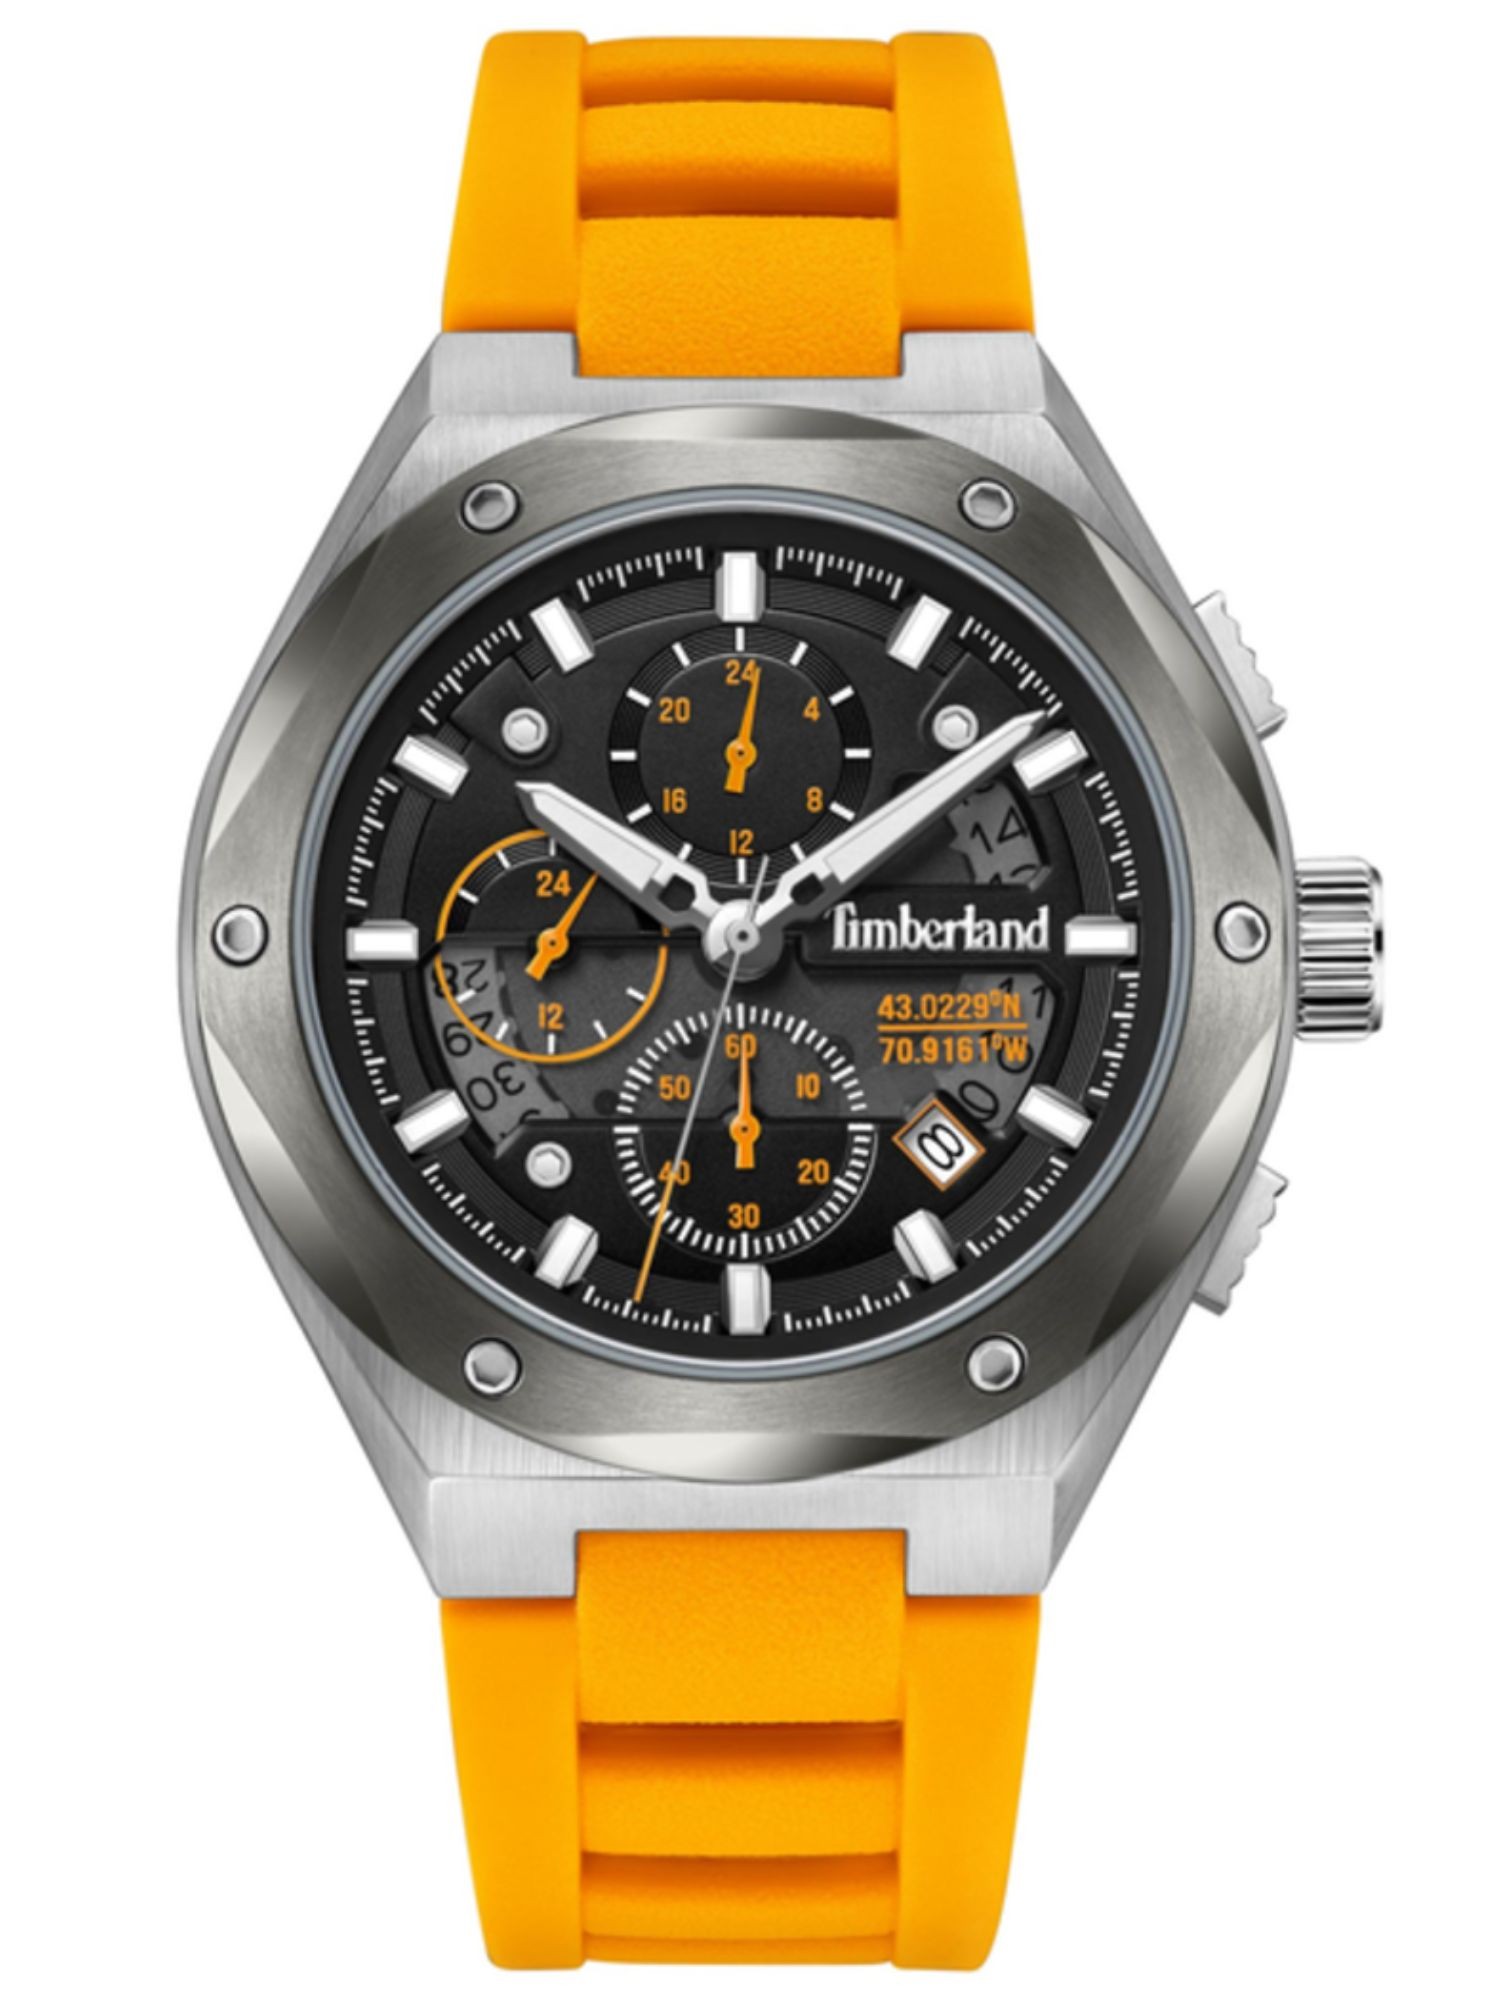 watch inicio Clicktime.eu» TDWGQ2231202 Timberland online TIMBERLAND in for Men\'s for Barato in | orange TIMBERLAND orange men\'s men\'s watch TDWGQ2231202 TDWGQ2231202 ABBOTVILLE | ABBOTVILLE Comprar inicio Comprar